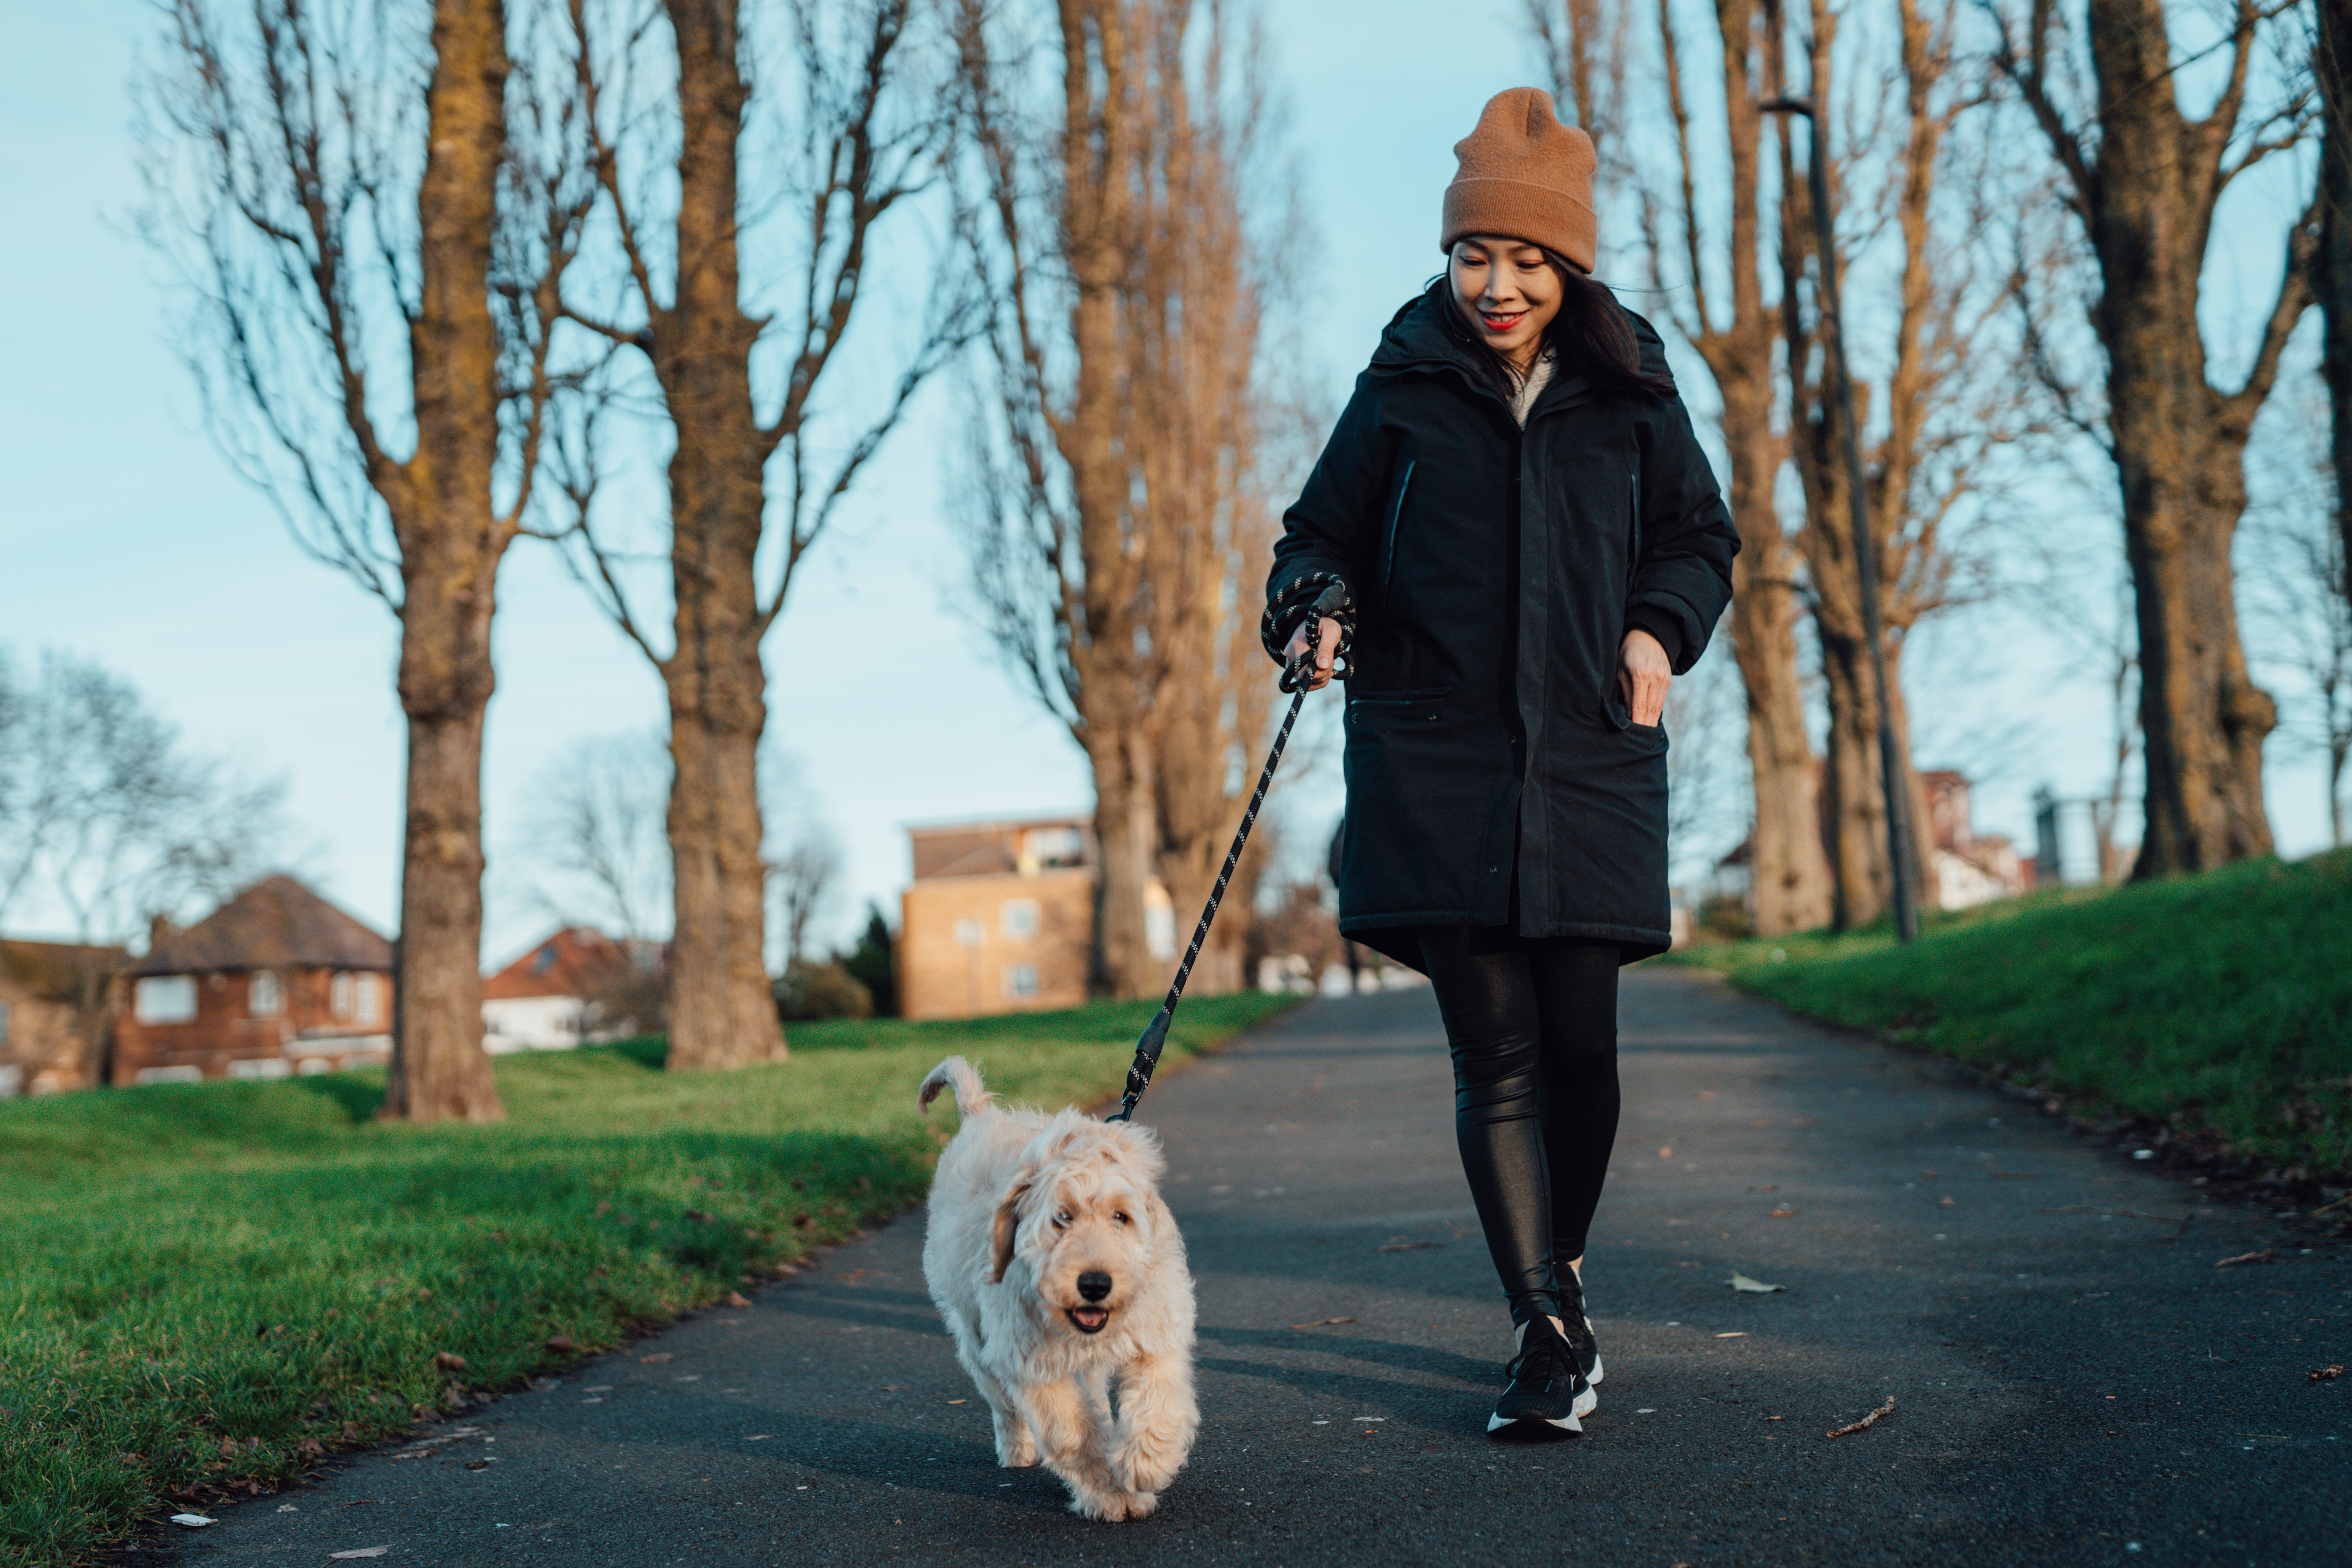 Woman walking her dog in a park, both looking content